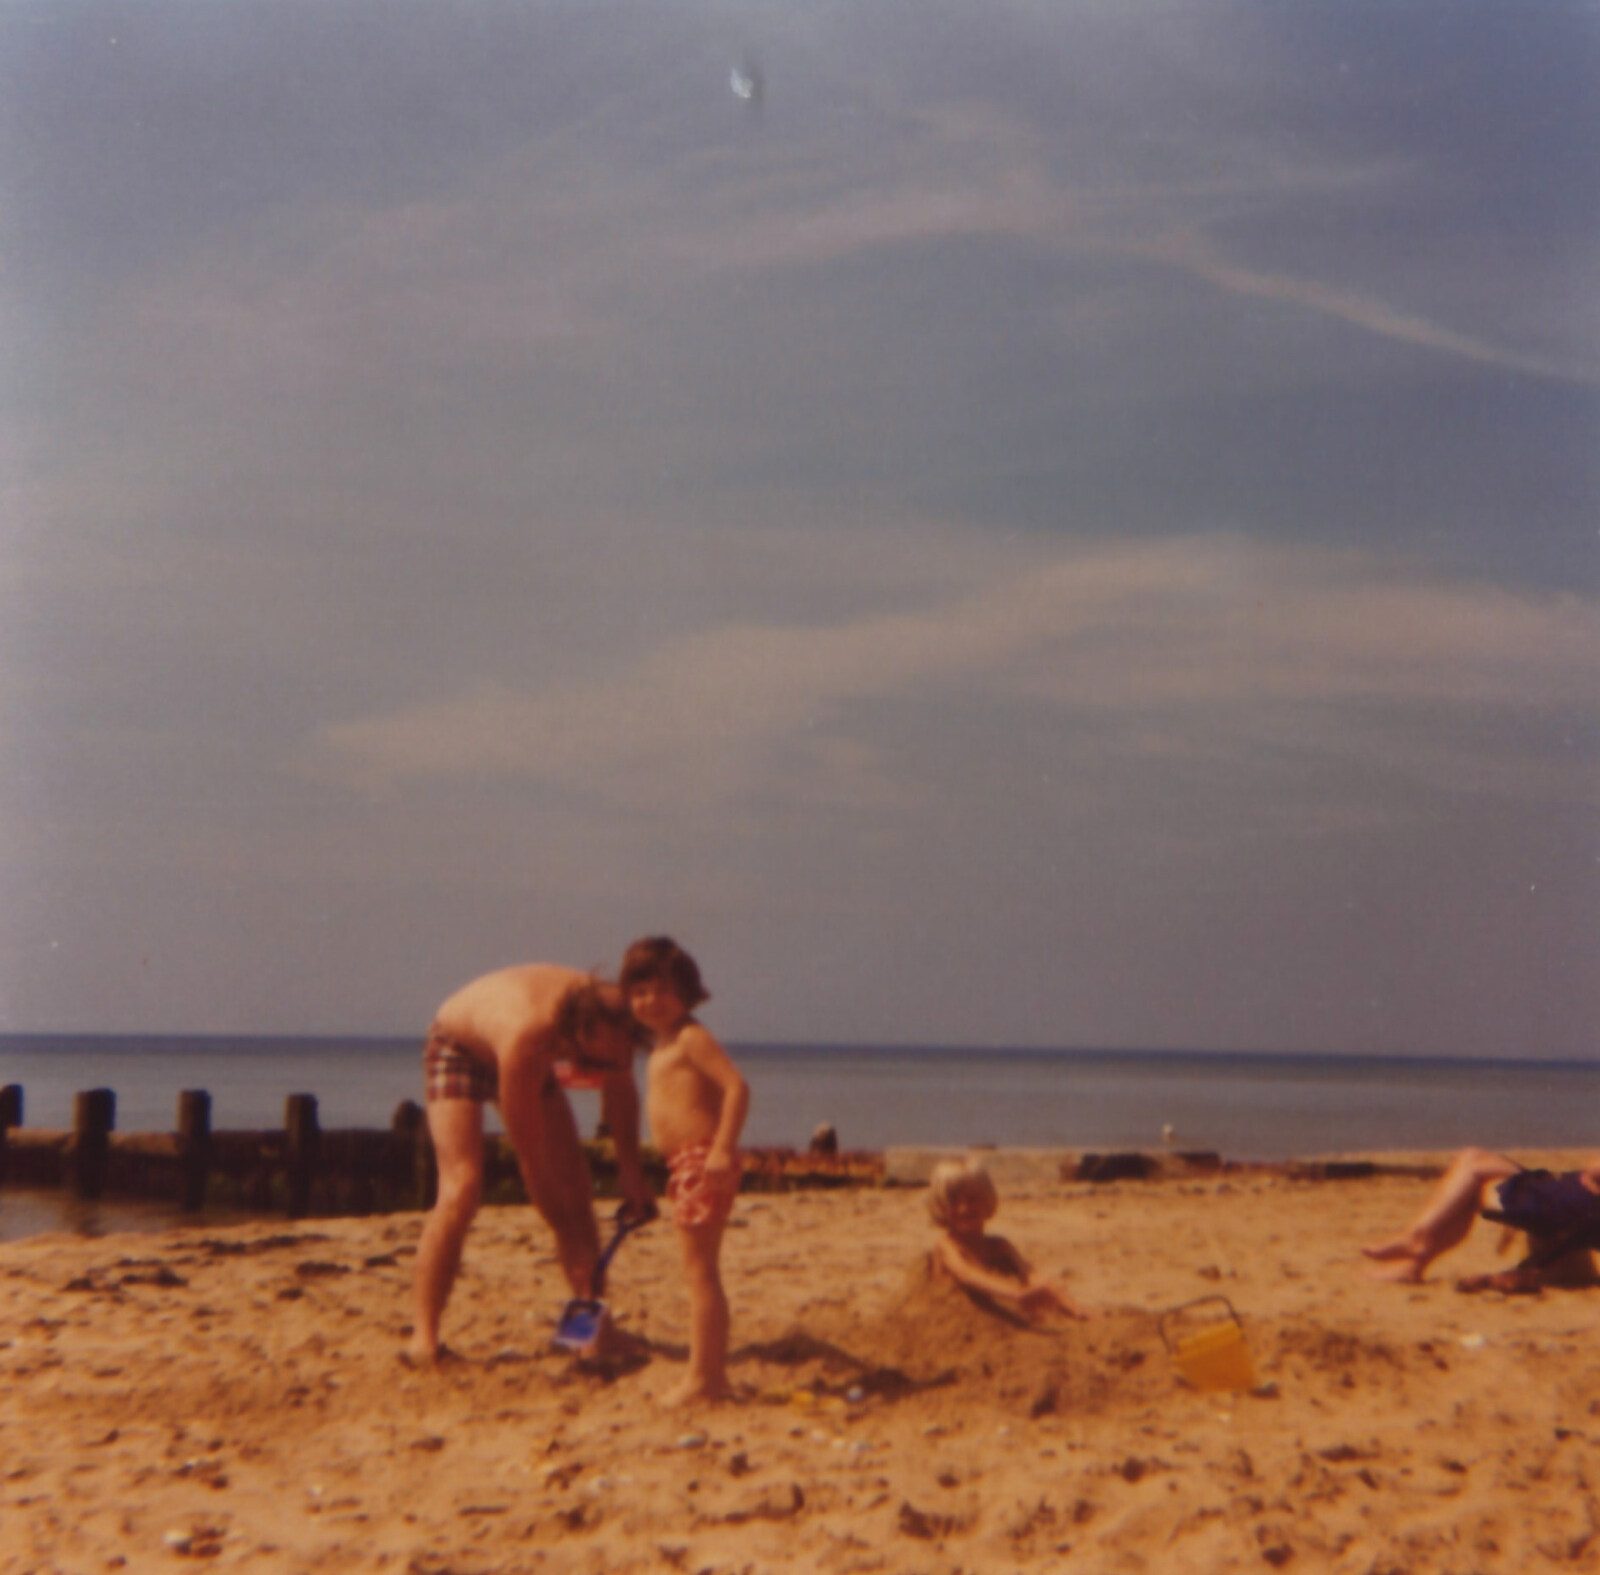 On the beach with the Old Man from Family History: The 1970s, Timperley and Sandbach, Cheshire - 24th January 2020